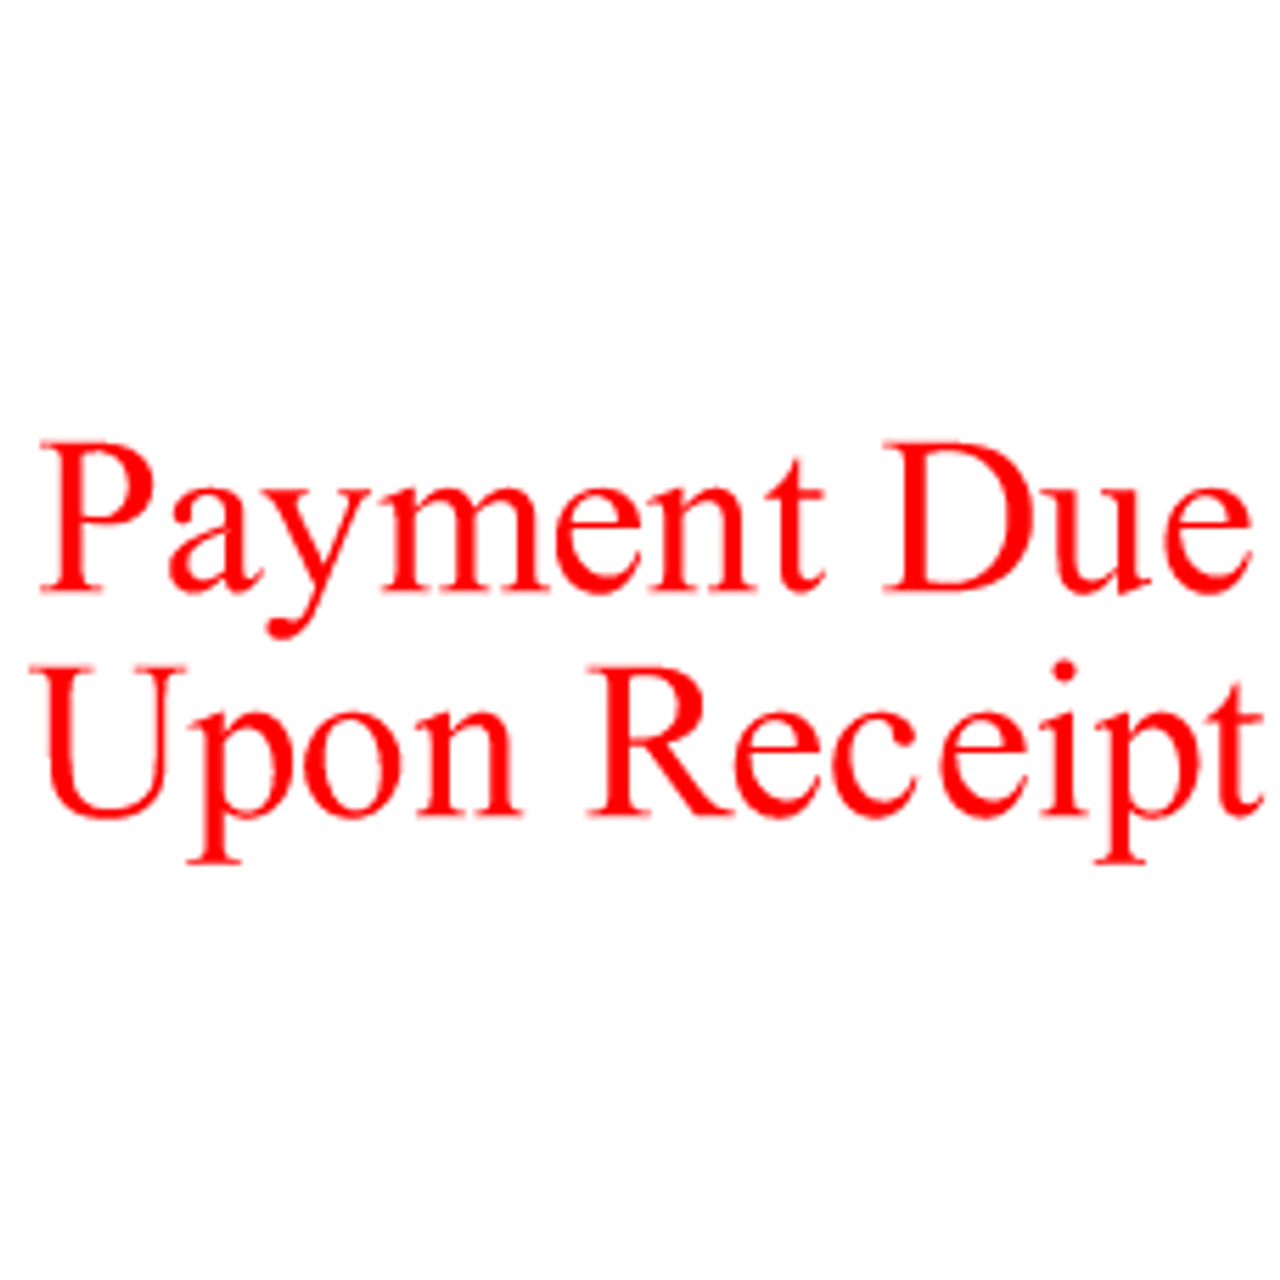 PAYMENT DUE UPON RECEIPT Rubber Stamp for office use self-inking